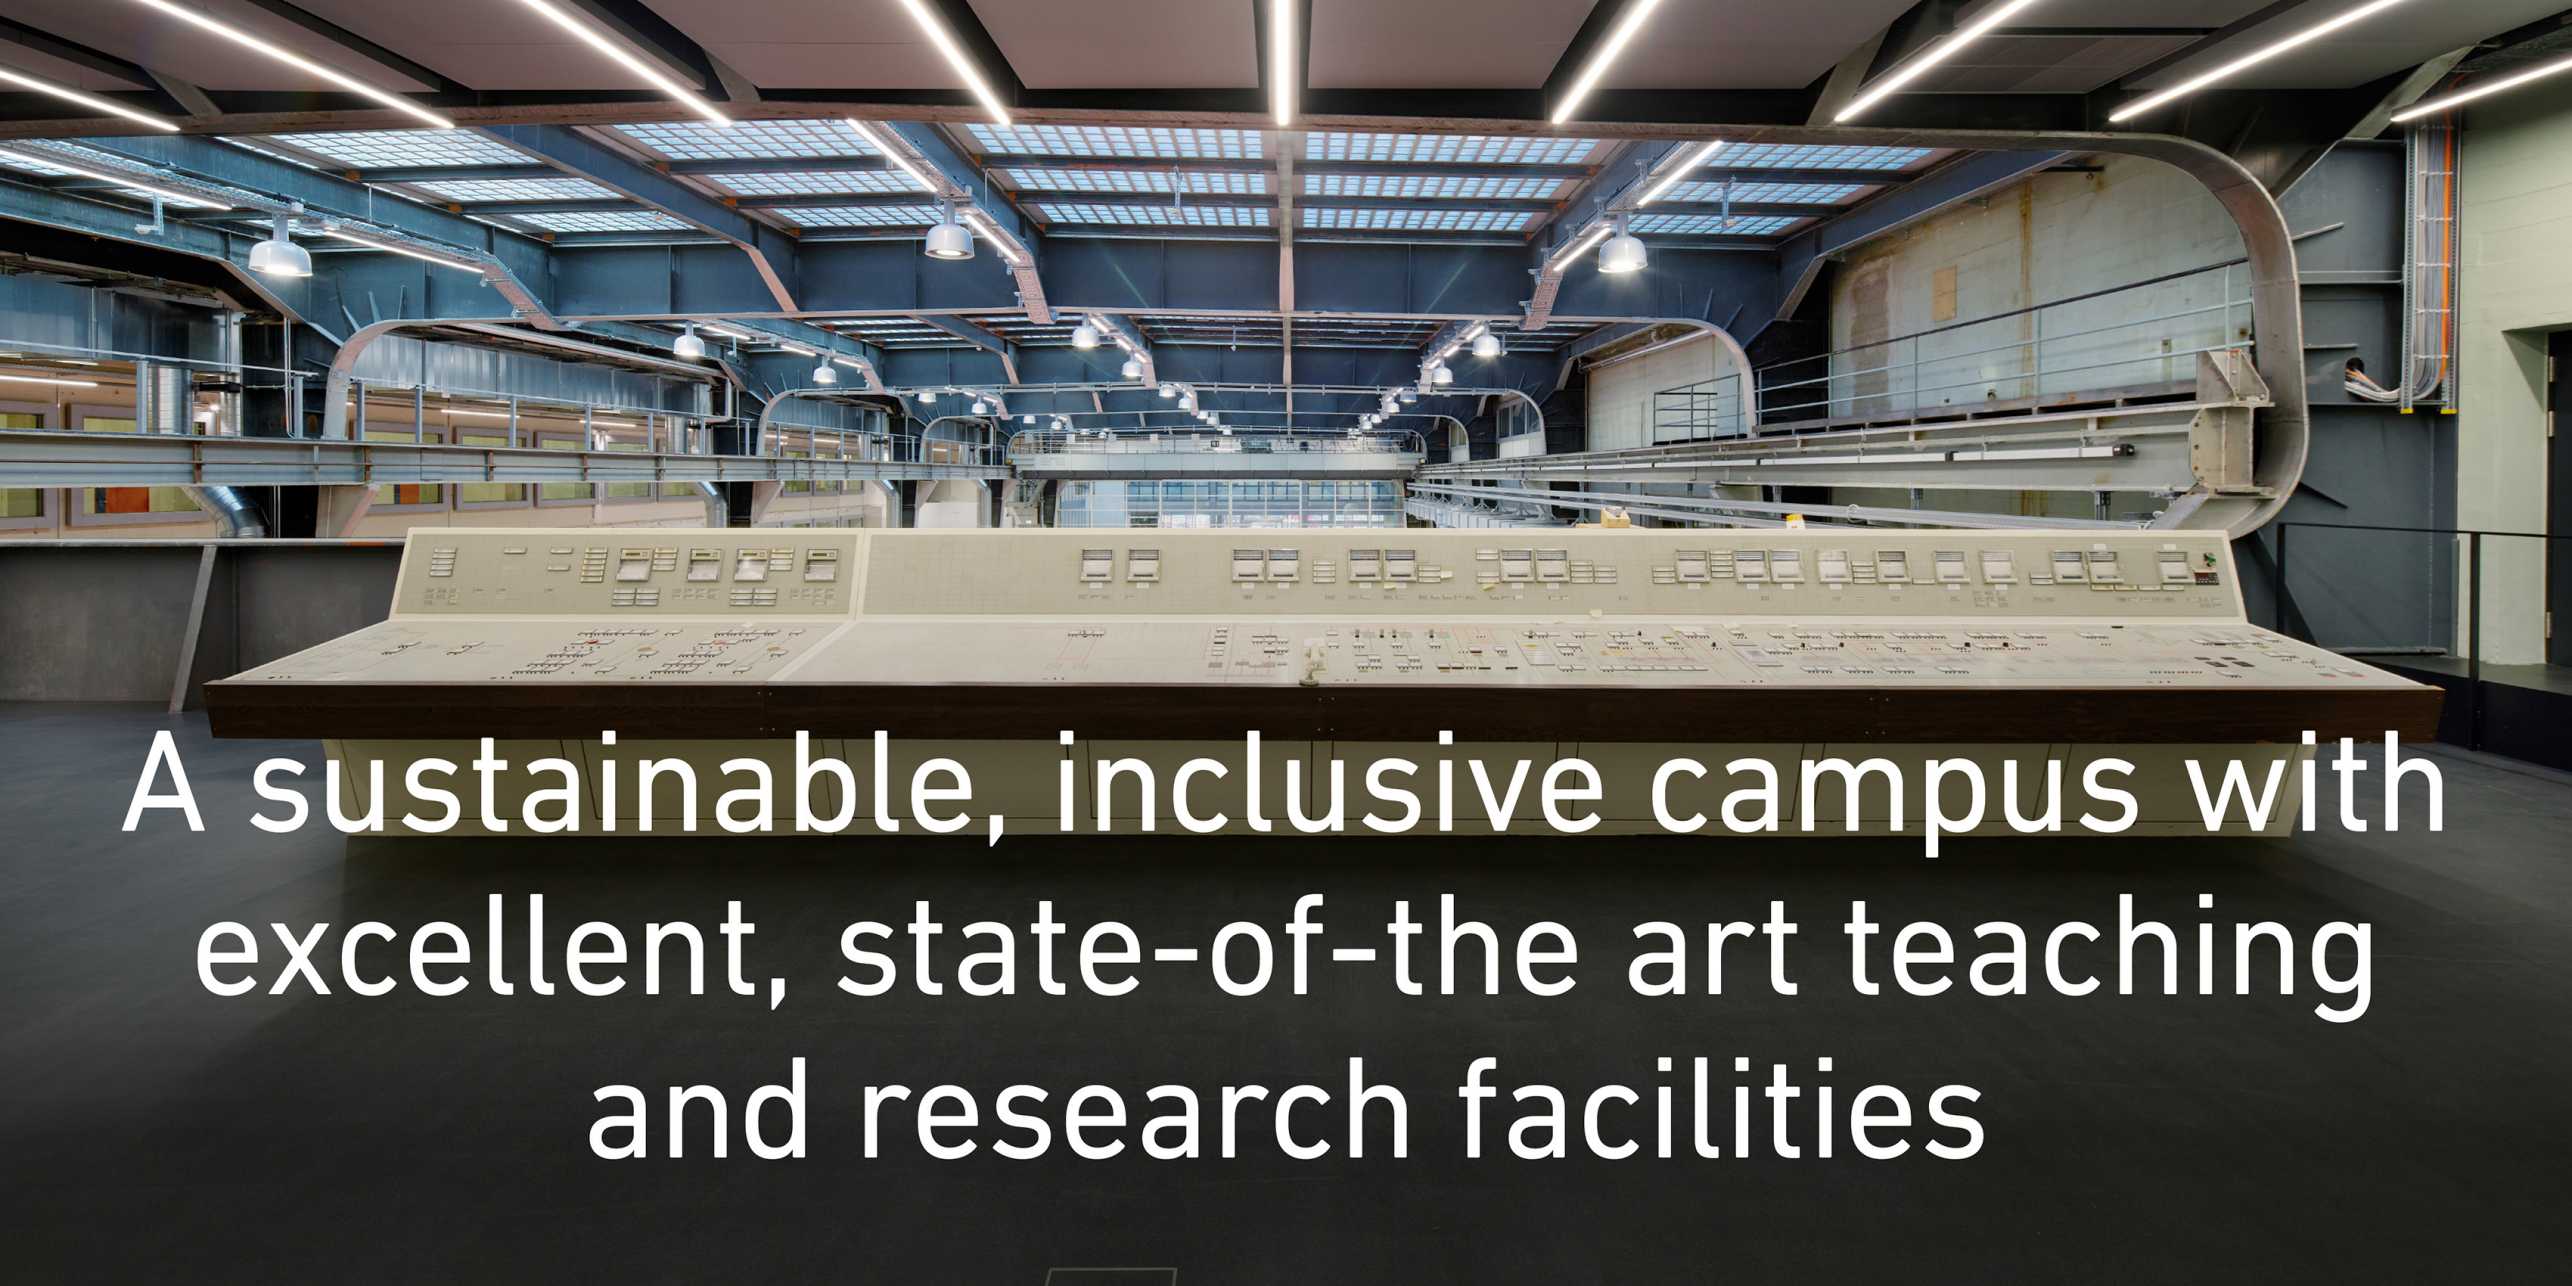 A sustainable, inclusive campus, combined with state-of-the art technology, offers excellent teaching and research facilities. Link to news article: ETH historic building renovated to current-day standards.